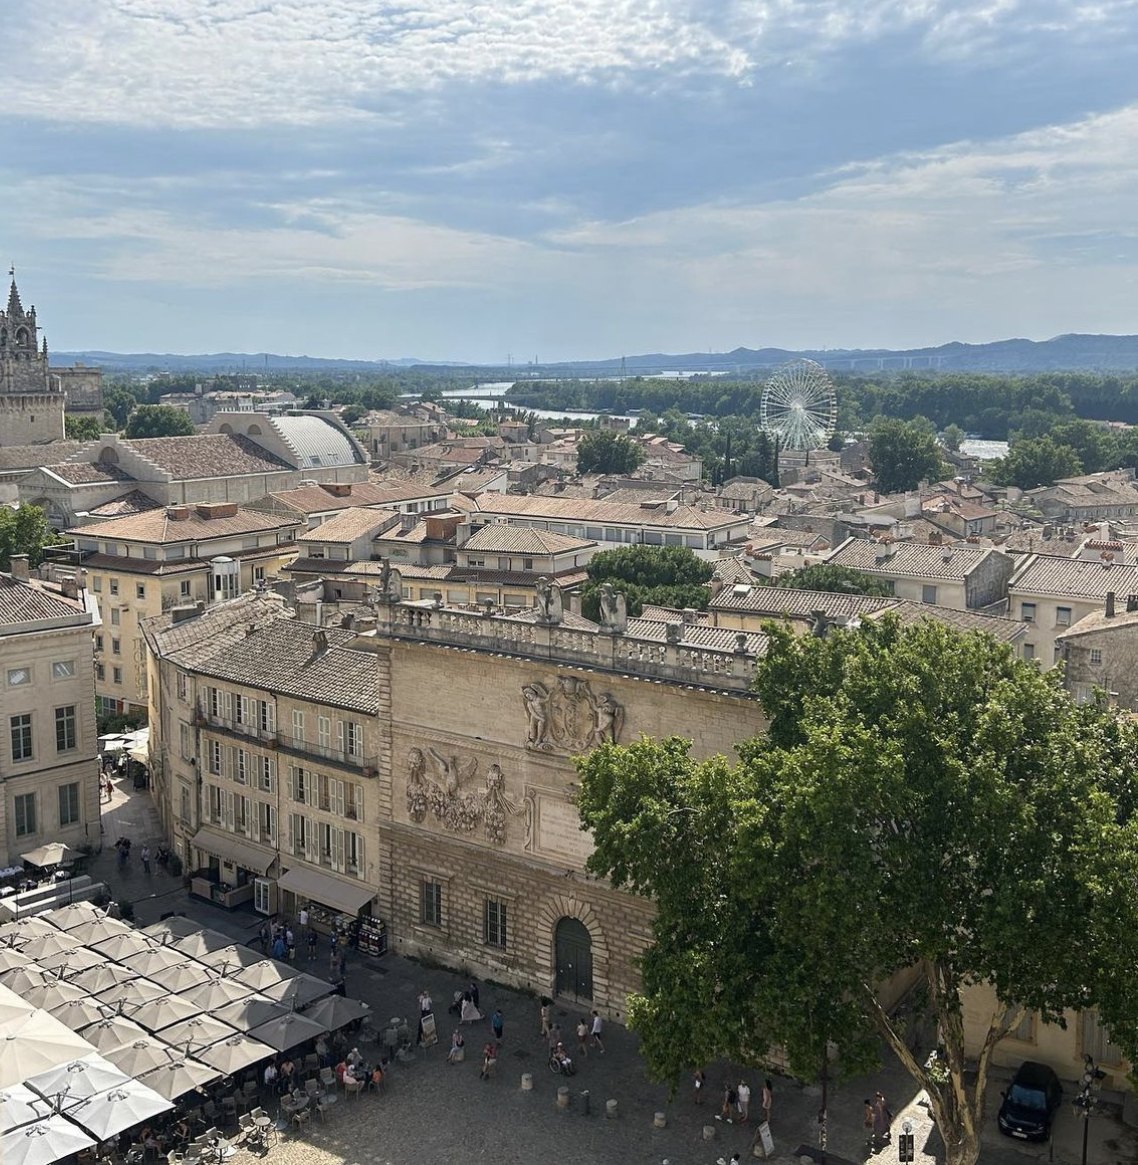 In Europe, students awakened to the bright mornings and views of Avignon, France before they began an eventful day.